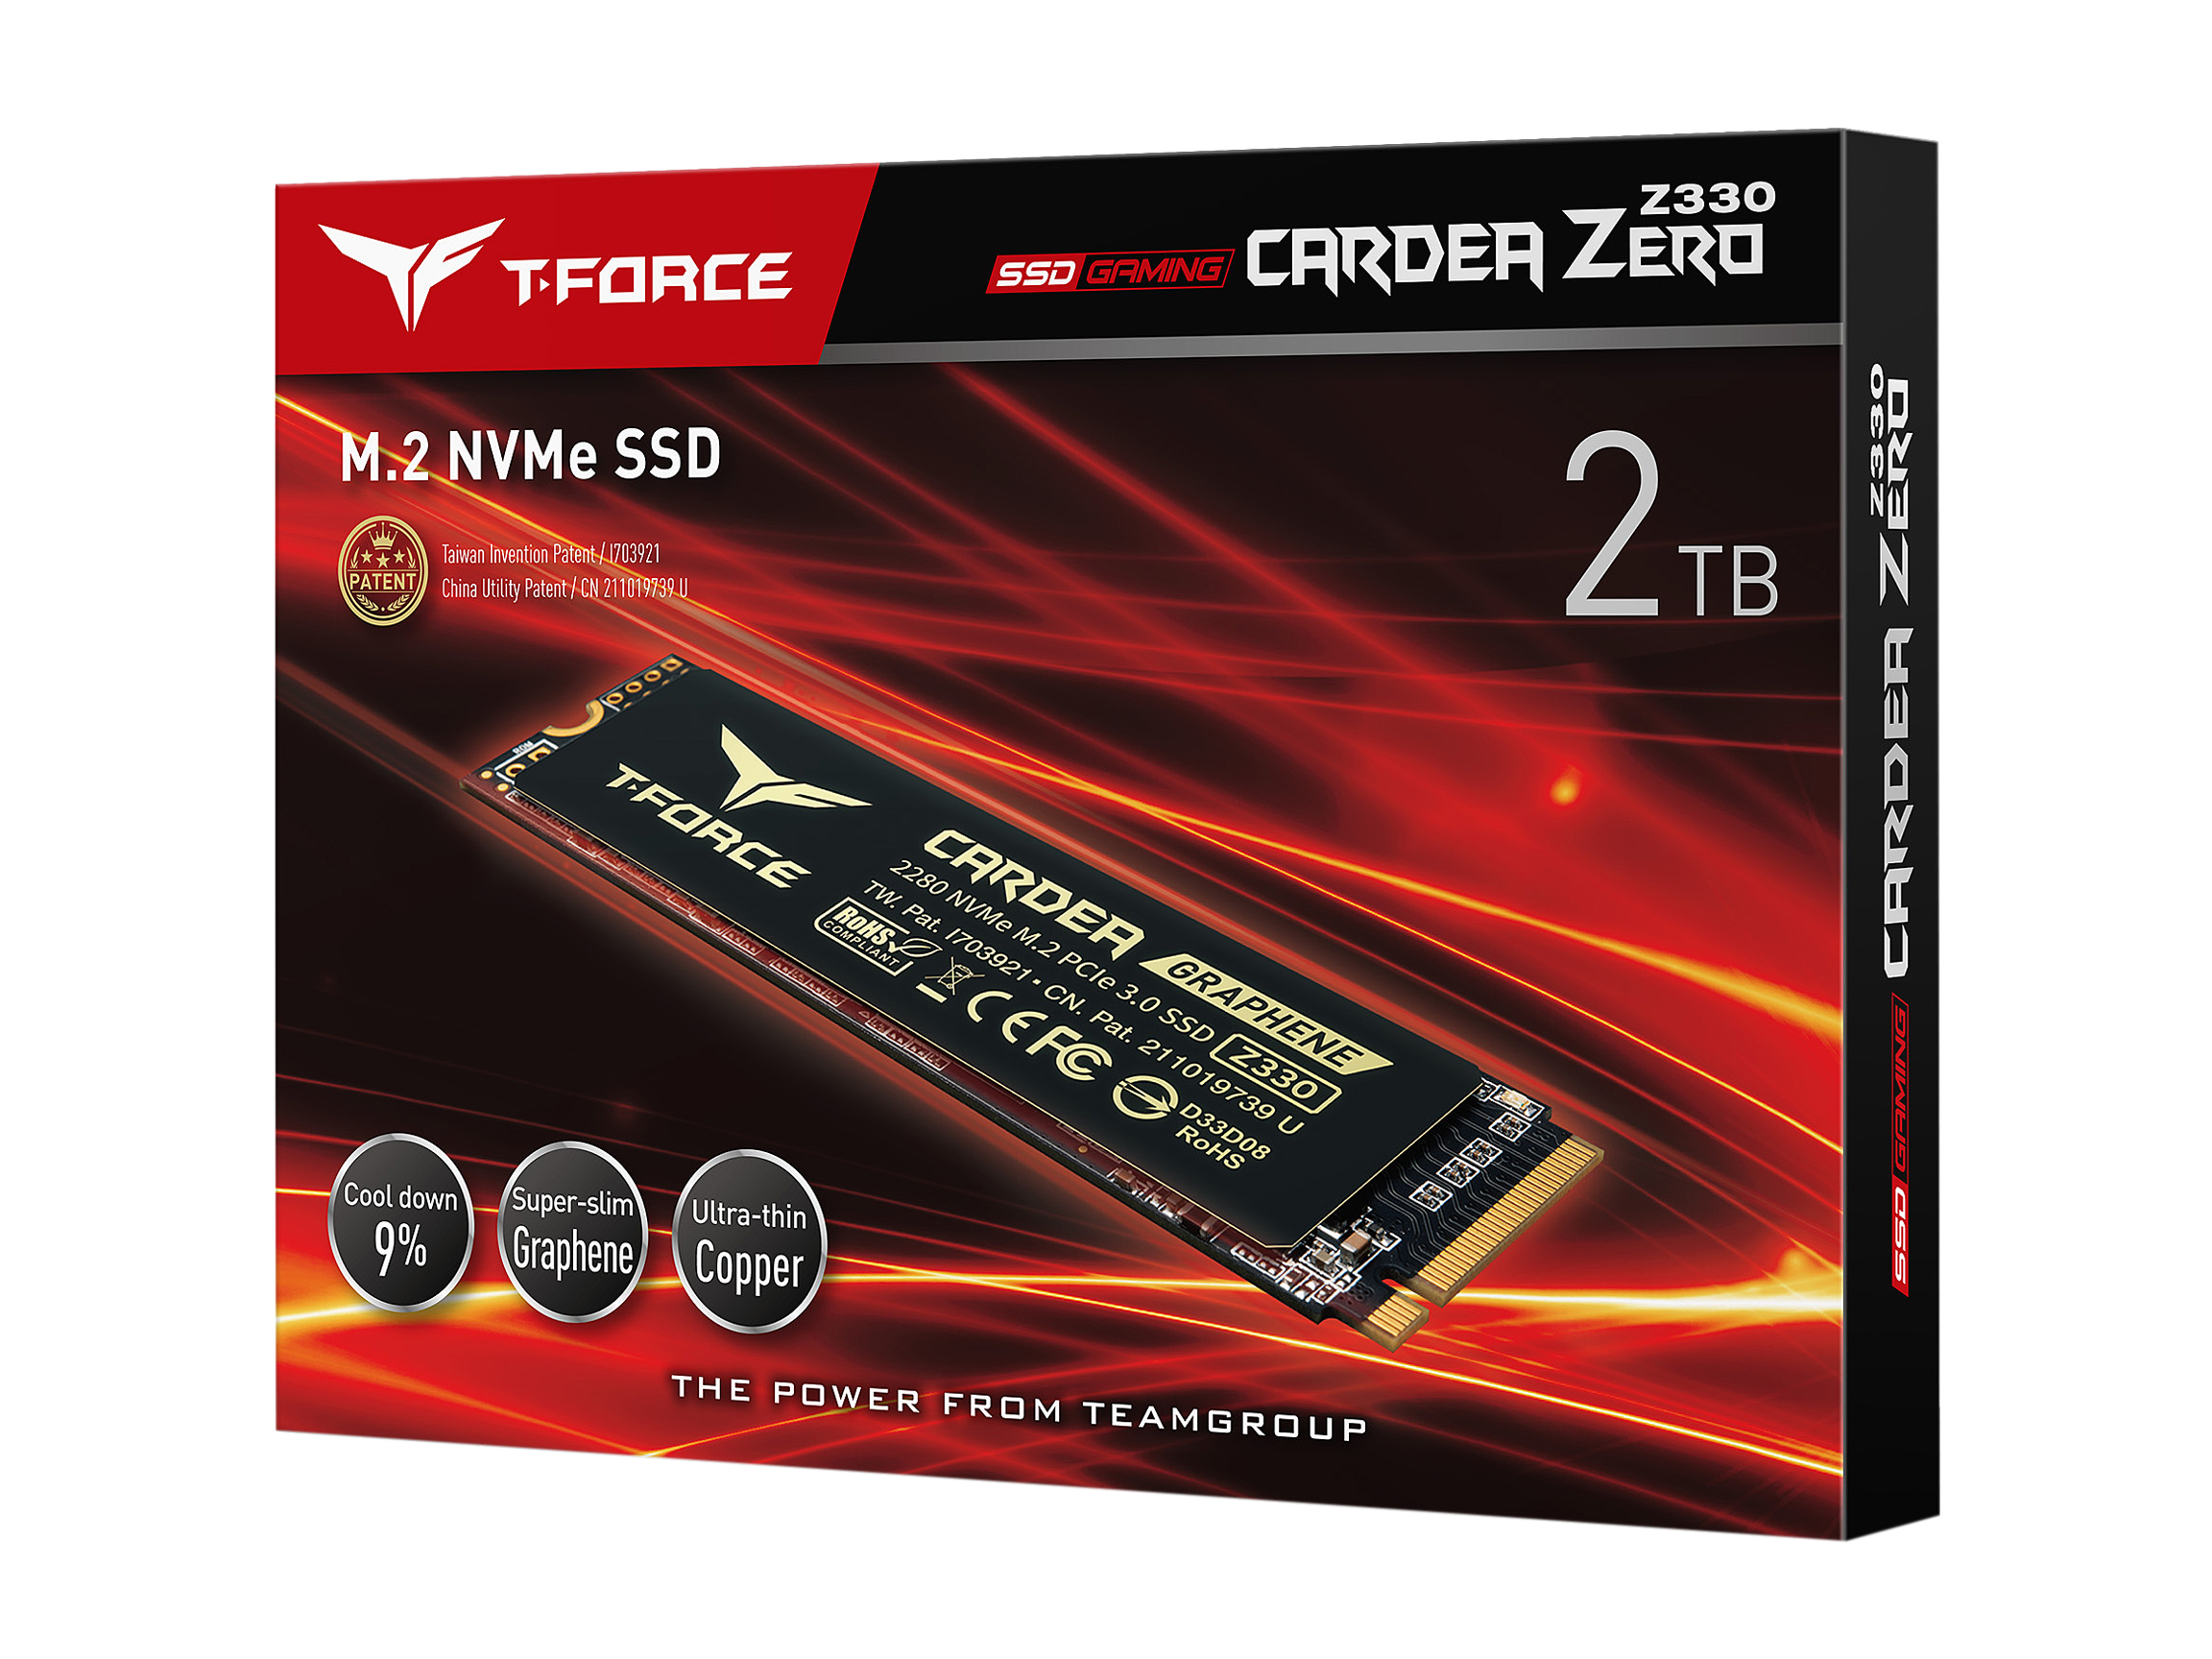 Team Group T-FORCE CARDEA ZERO Z330 M.2 2280 2TB PCIe Gen3 x4 with NVMe 1.3 Internal Solid State Drive (SSD) TM8FP8002T0C311